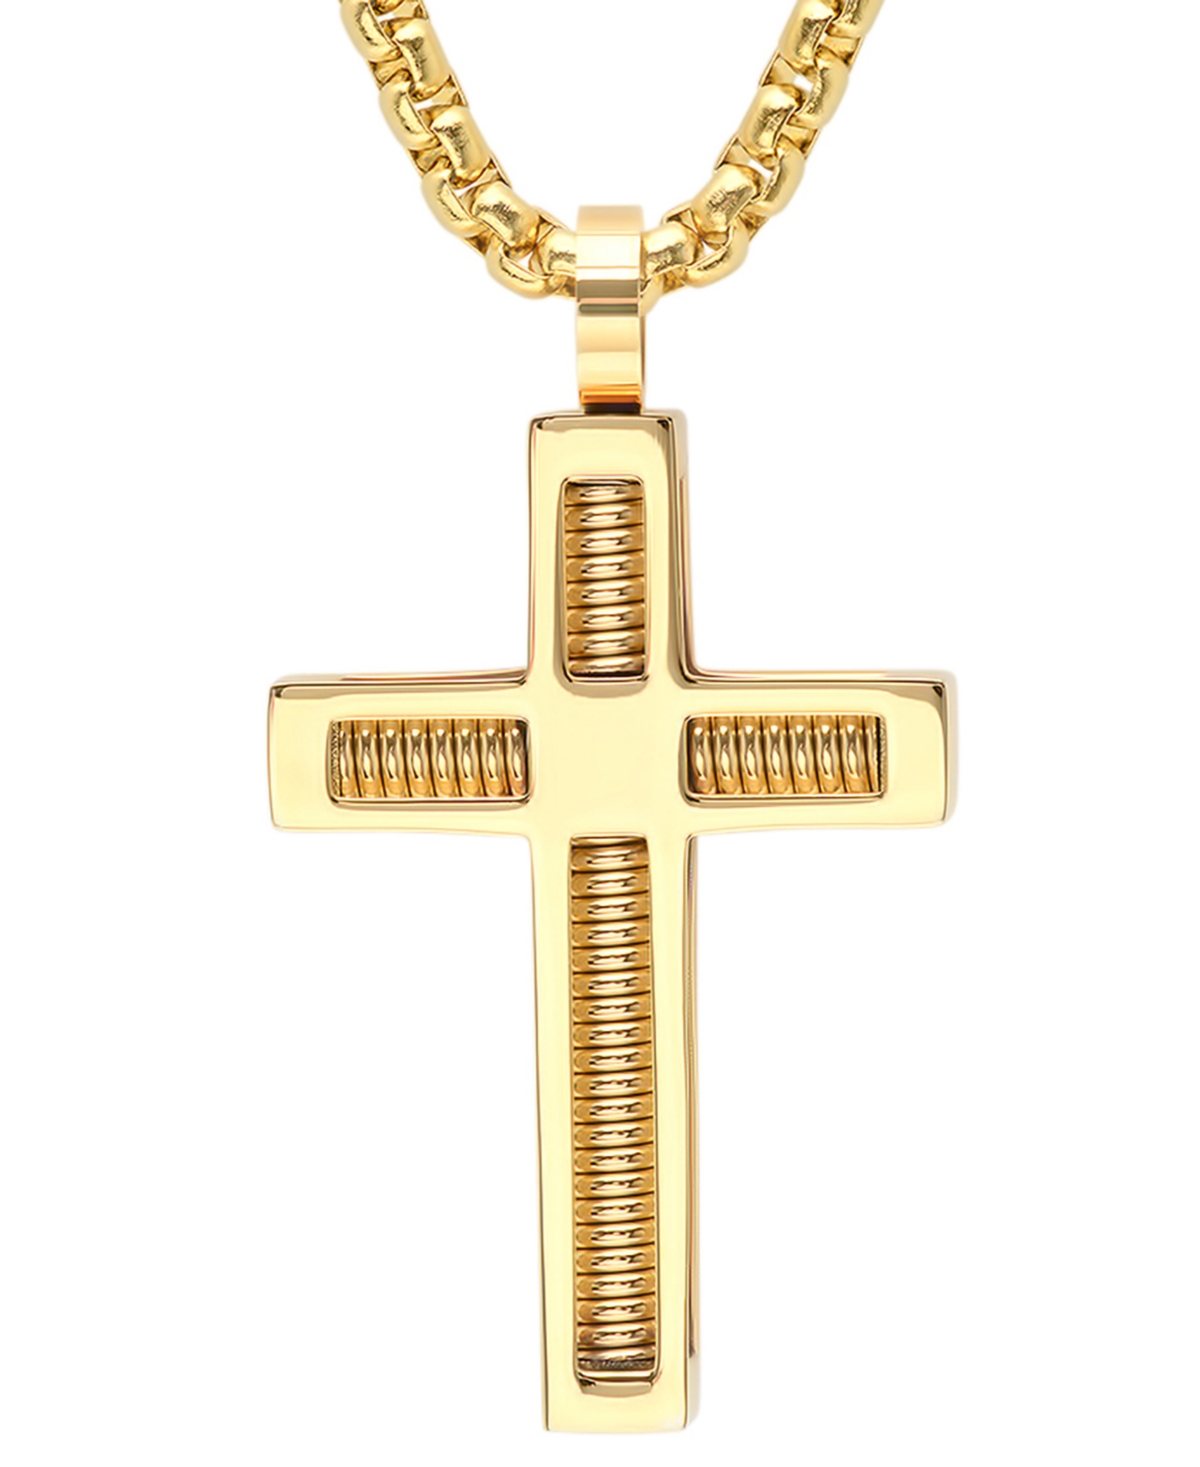 Men's 18k Gold-Plated Stainless Steel Spring Inlay Cross 24" Pendant Necklace - Gold